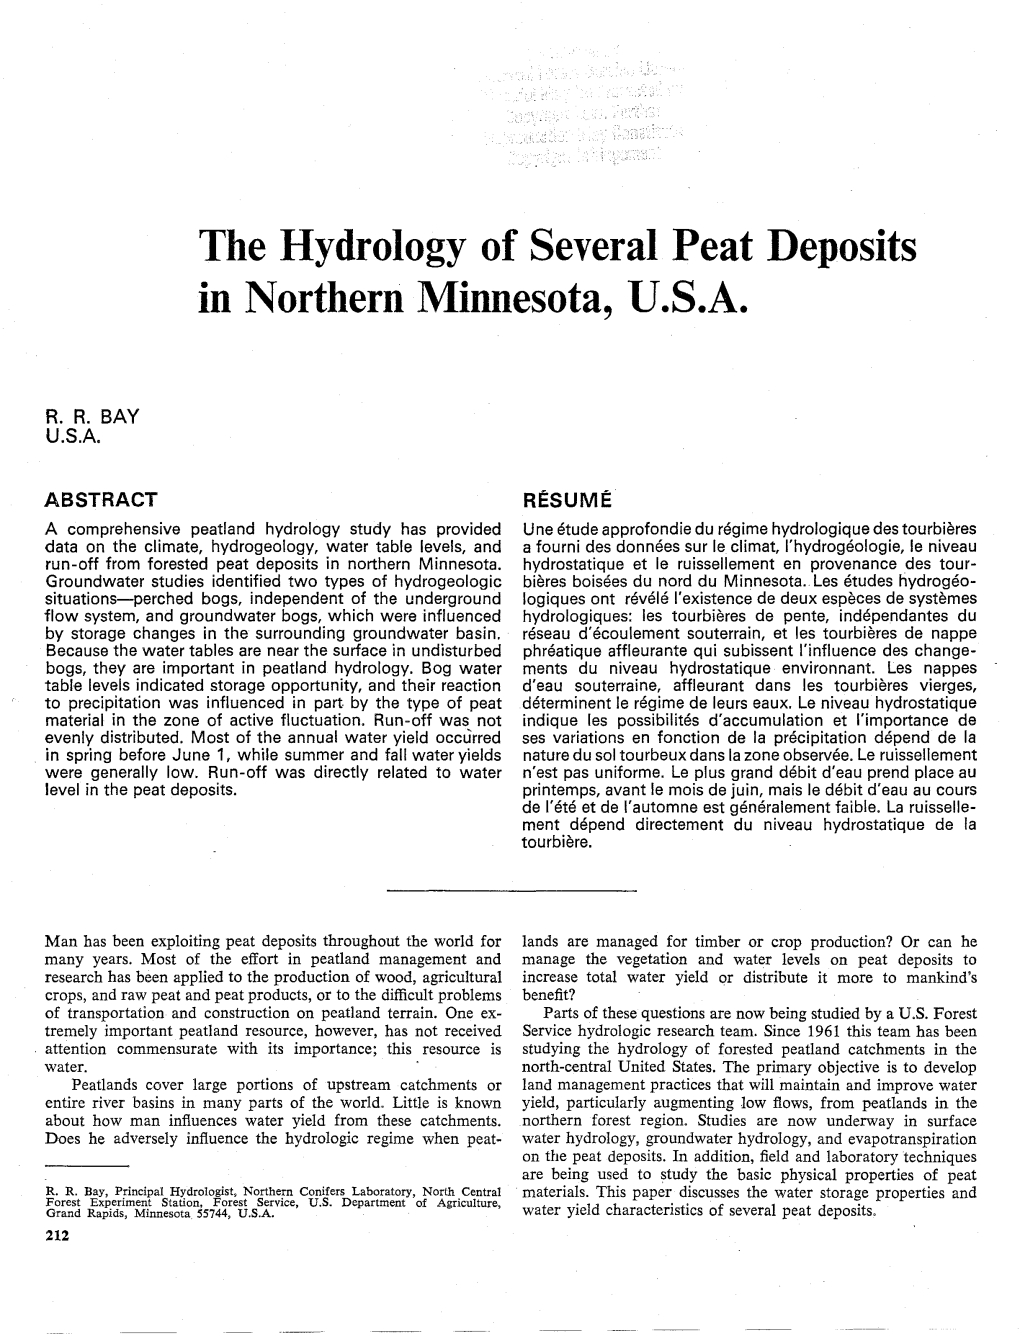 The Hydrology of Several Peat Deposits in Northern Minnesota, U.S.A